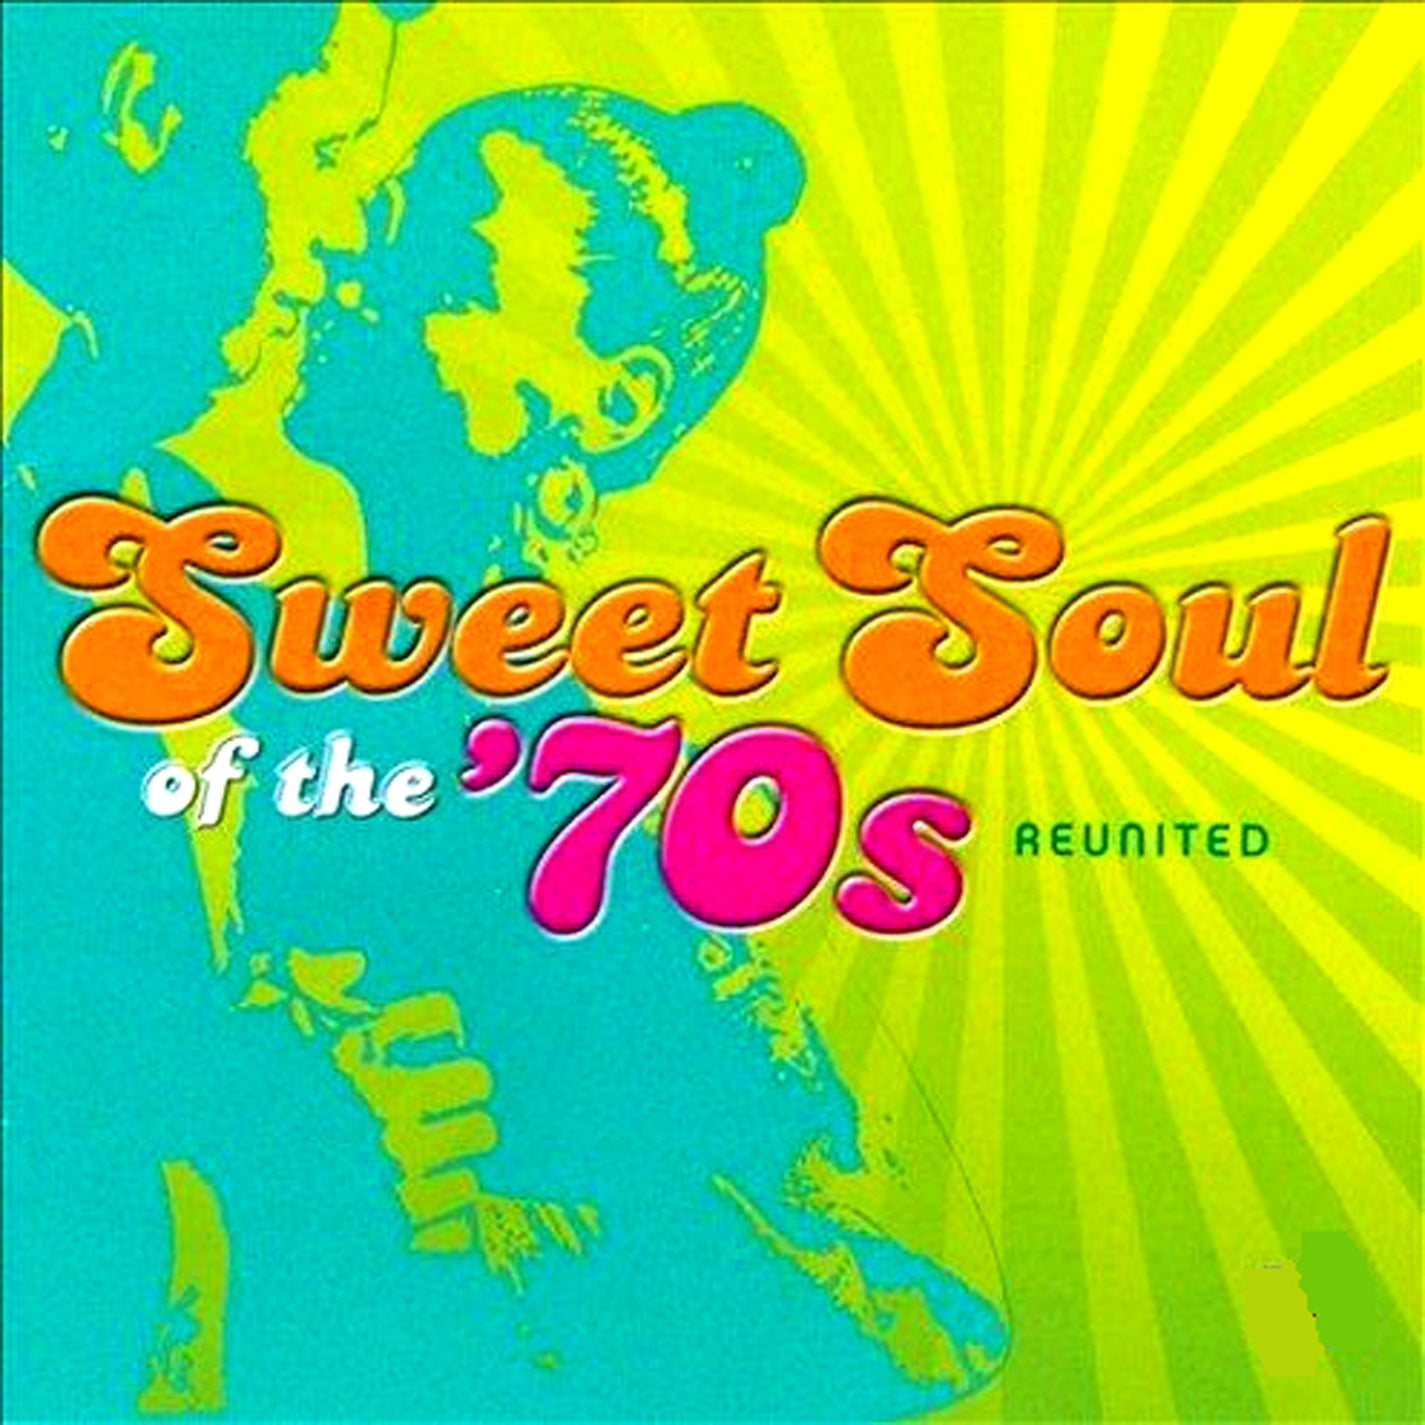 SWEET SOUL OF THE 70'S - REUNITED - VARIOUS ARTISTS (CD LP) c1970